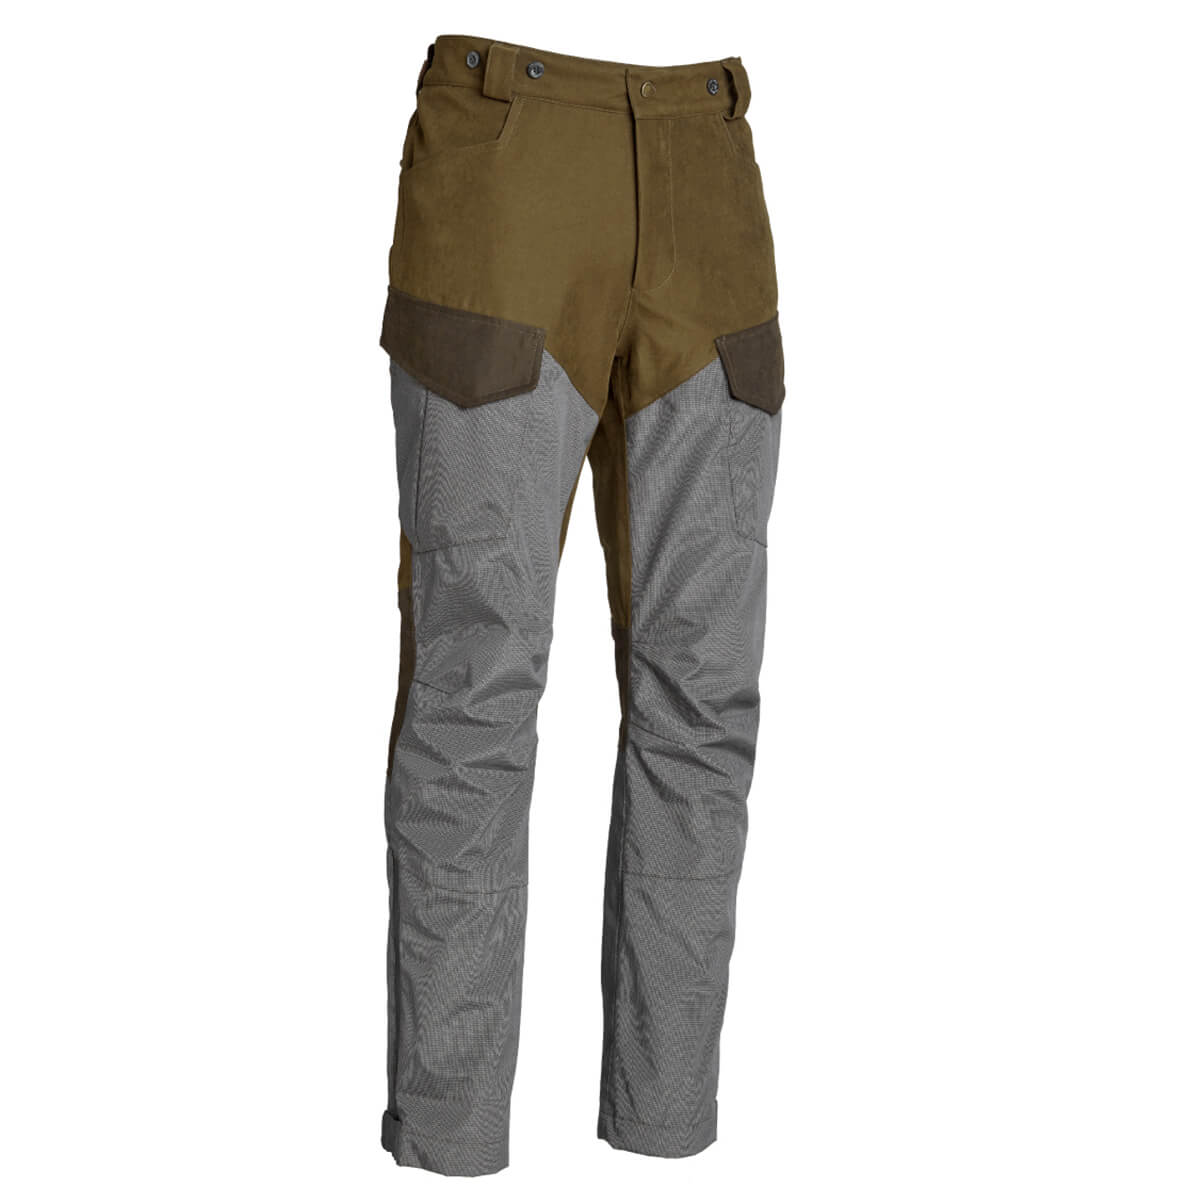 Northern Hunting trousers Geir Agnar - Driven Hunt